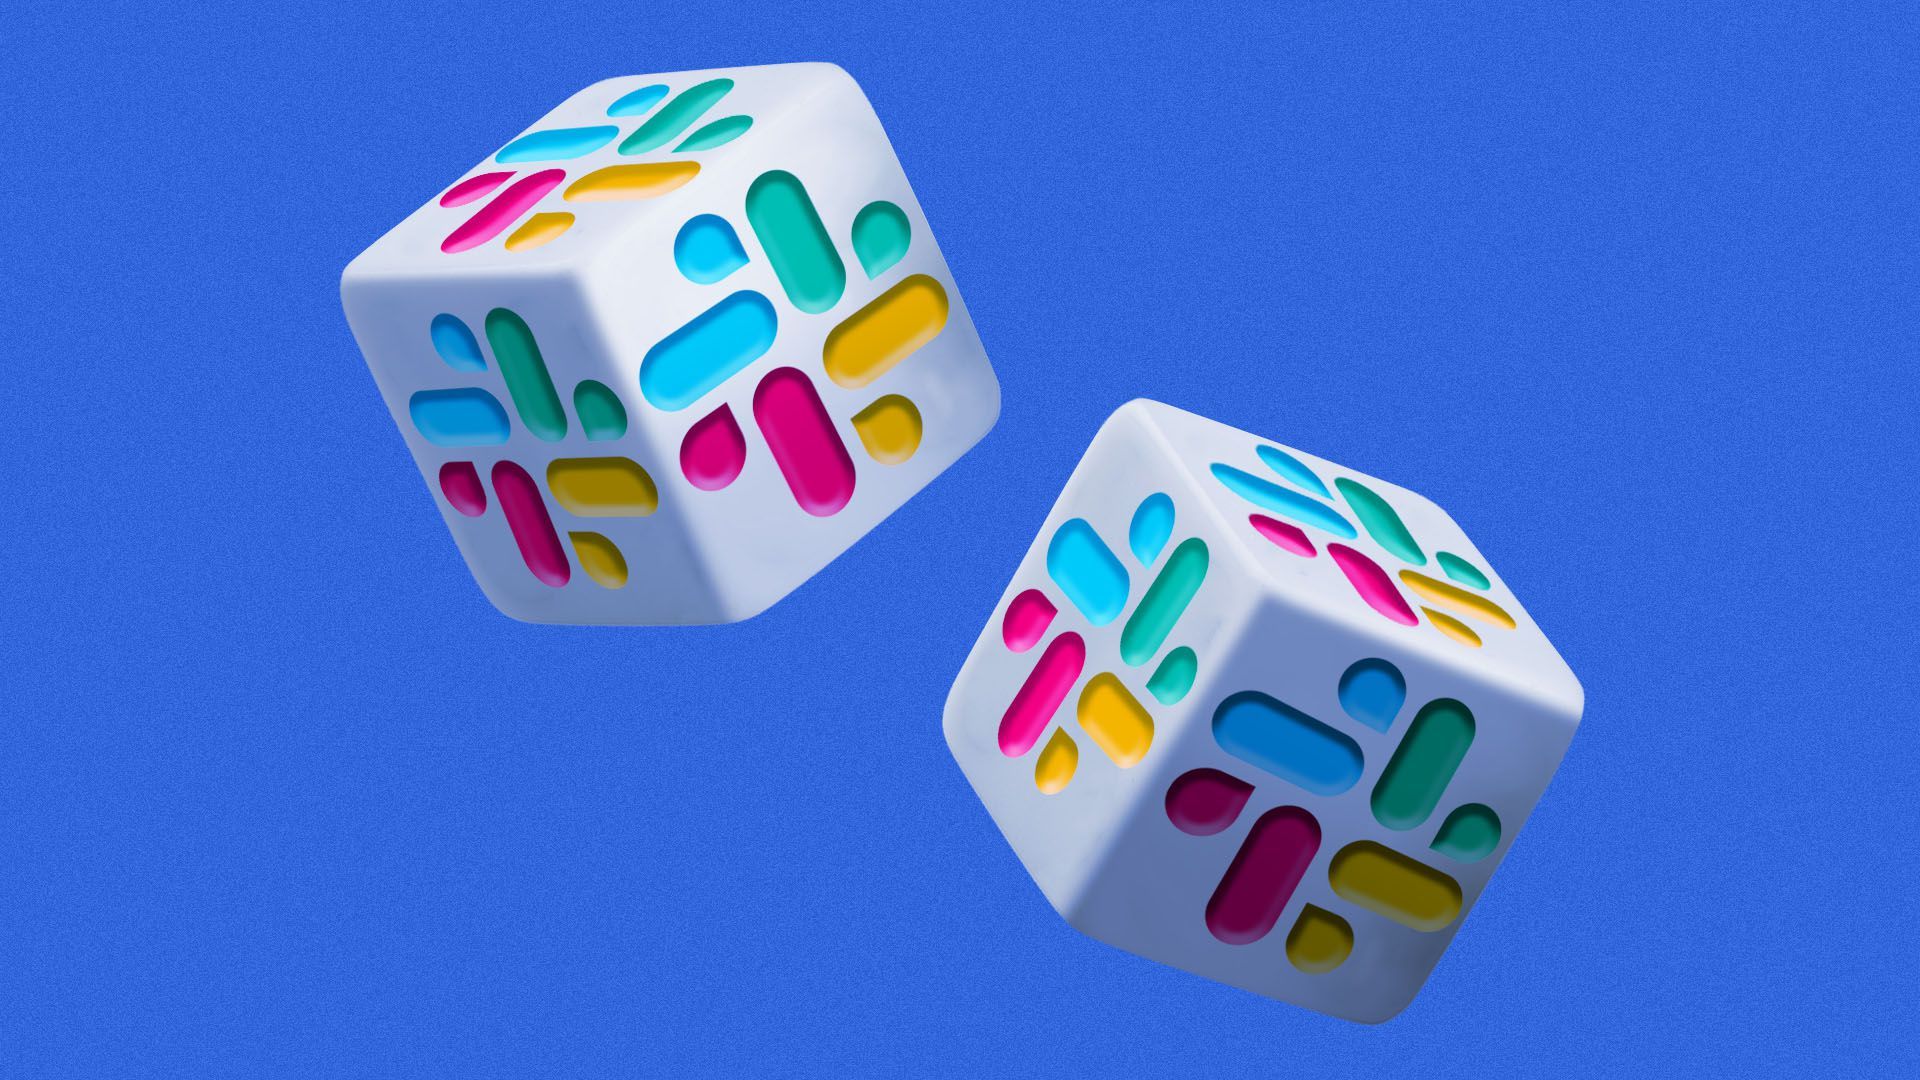 Illustration of a pair of dice with the slack logo on them